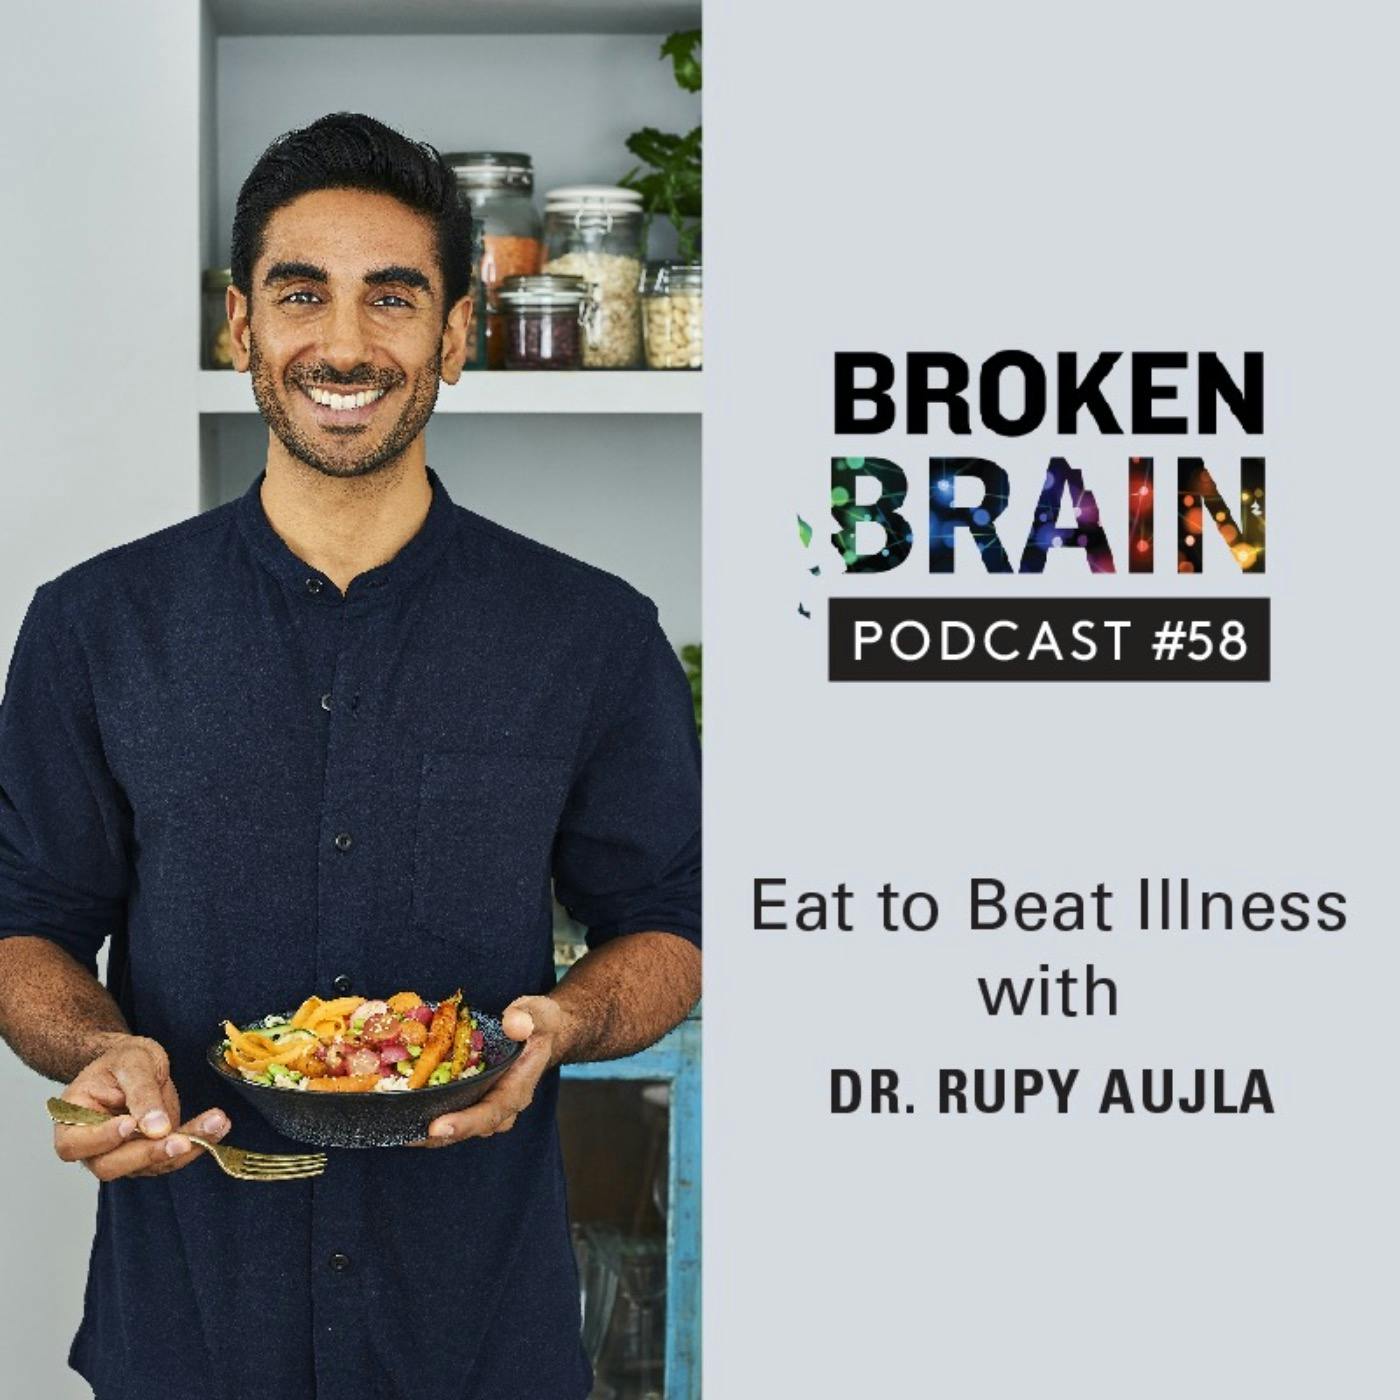 #58: Eat to Beat Illness with Dr. Rupy Aujla